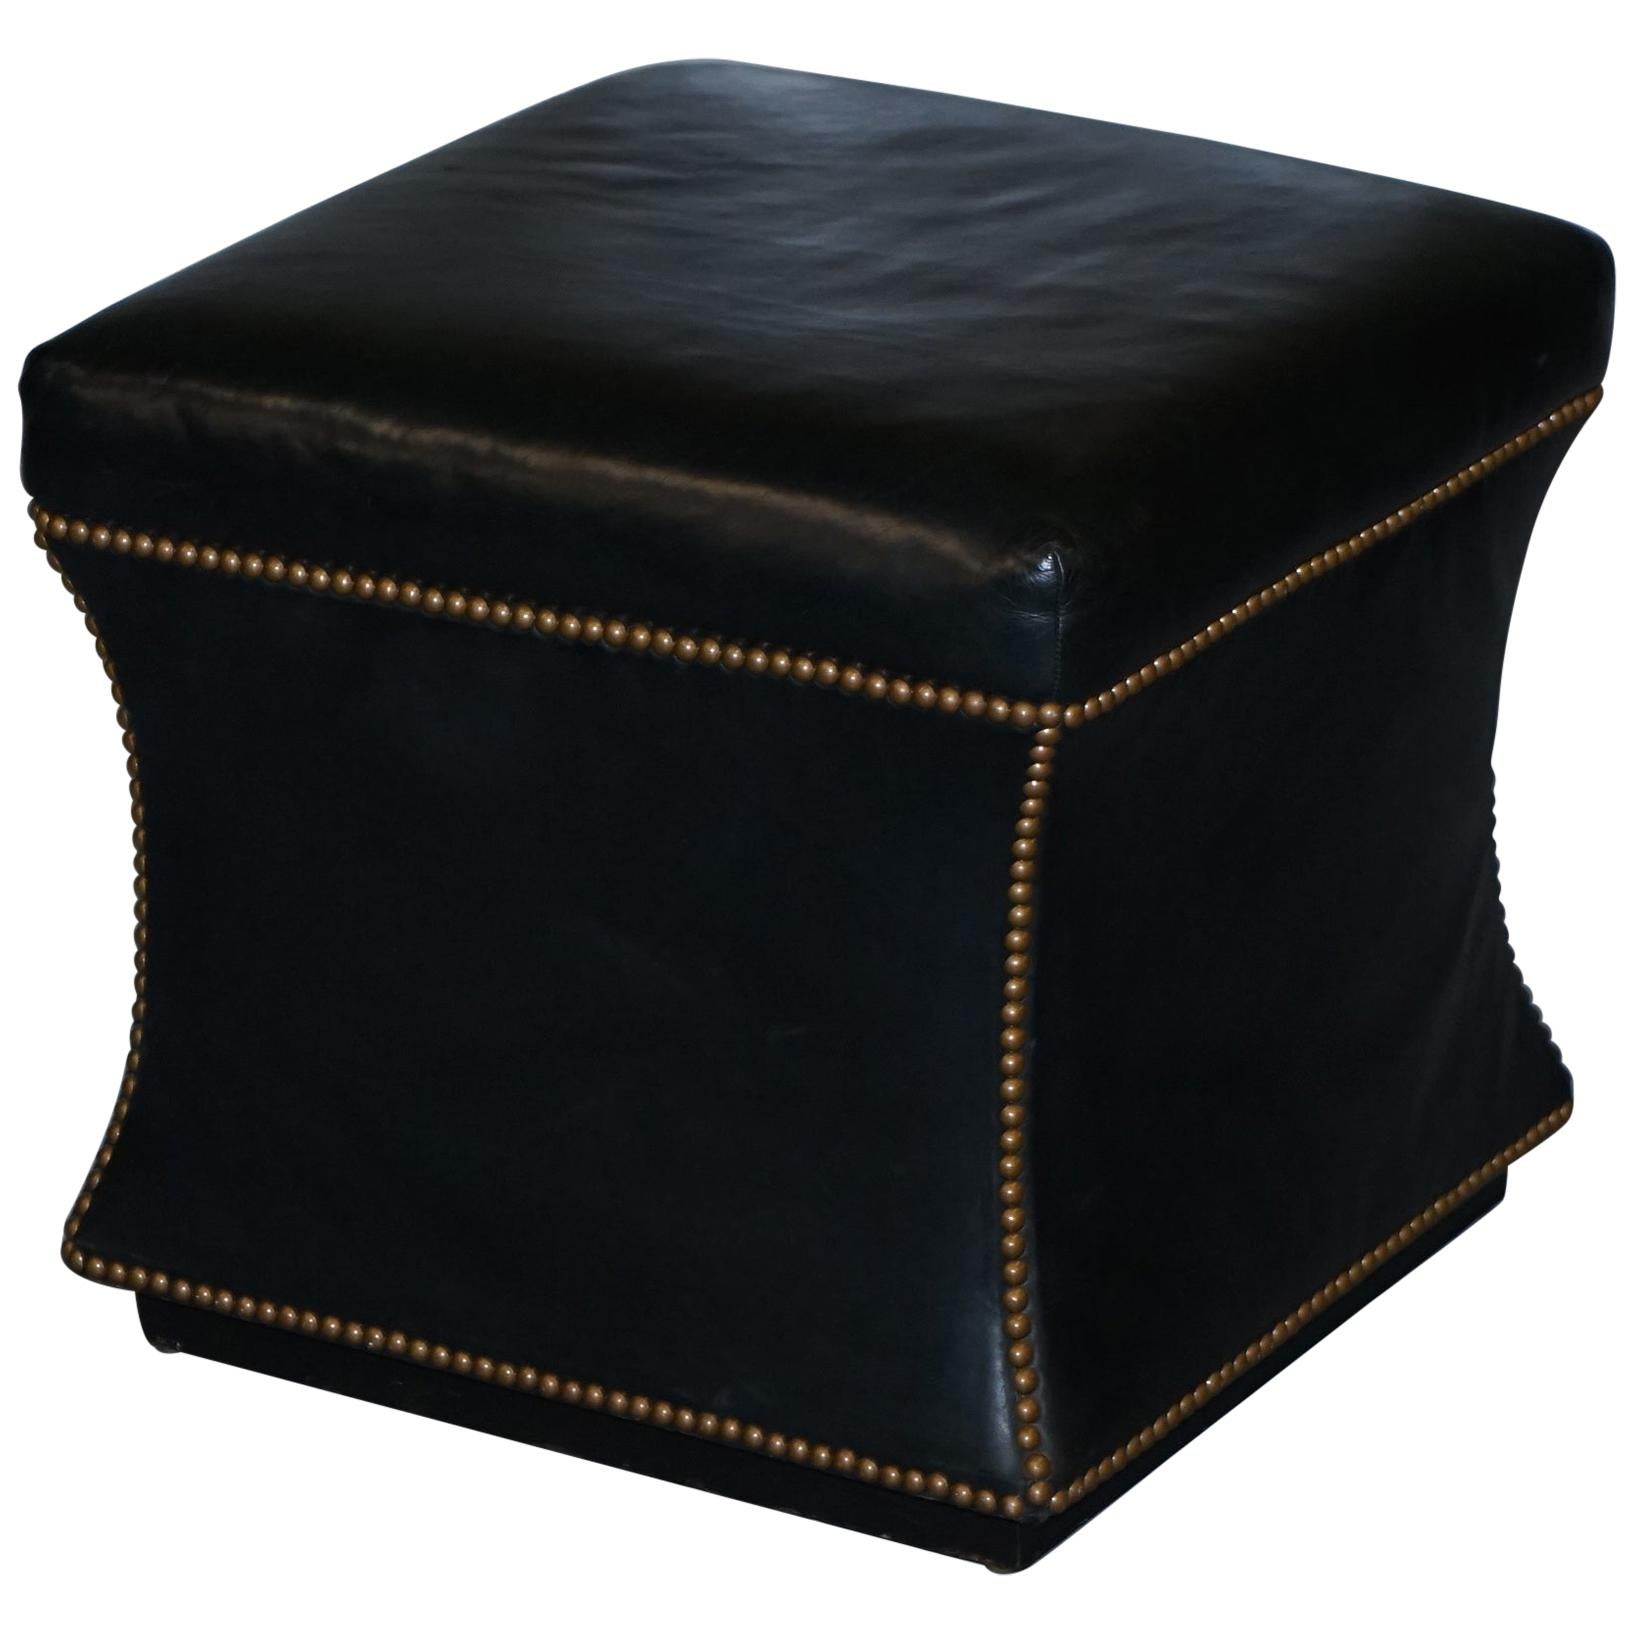 Ralph Lauren Black Leather Florence Ottoman in the Style of Victorian Footstools